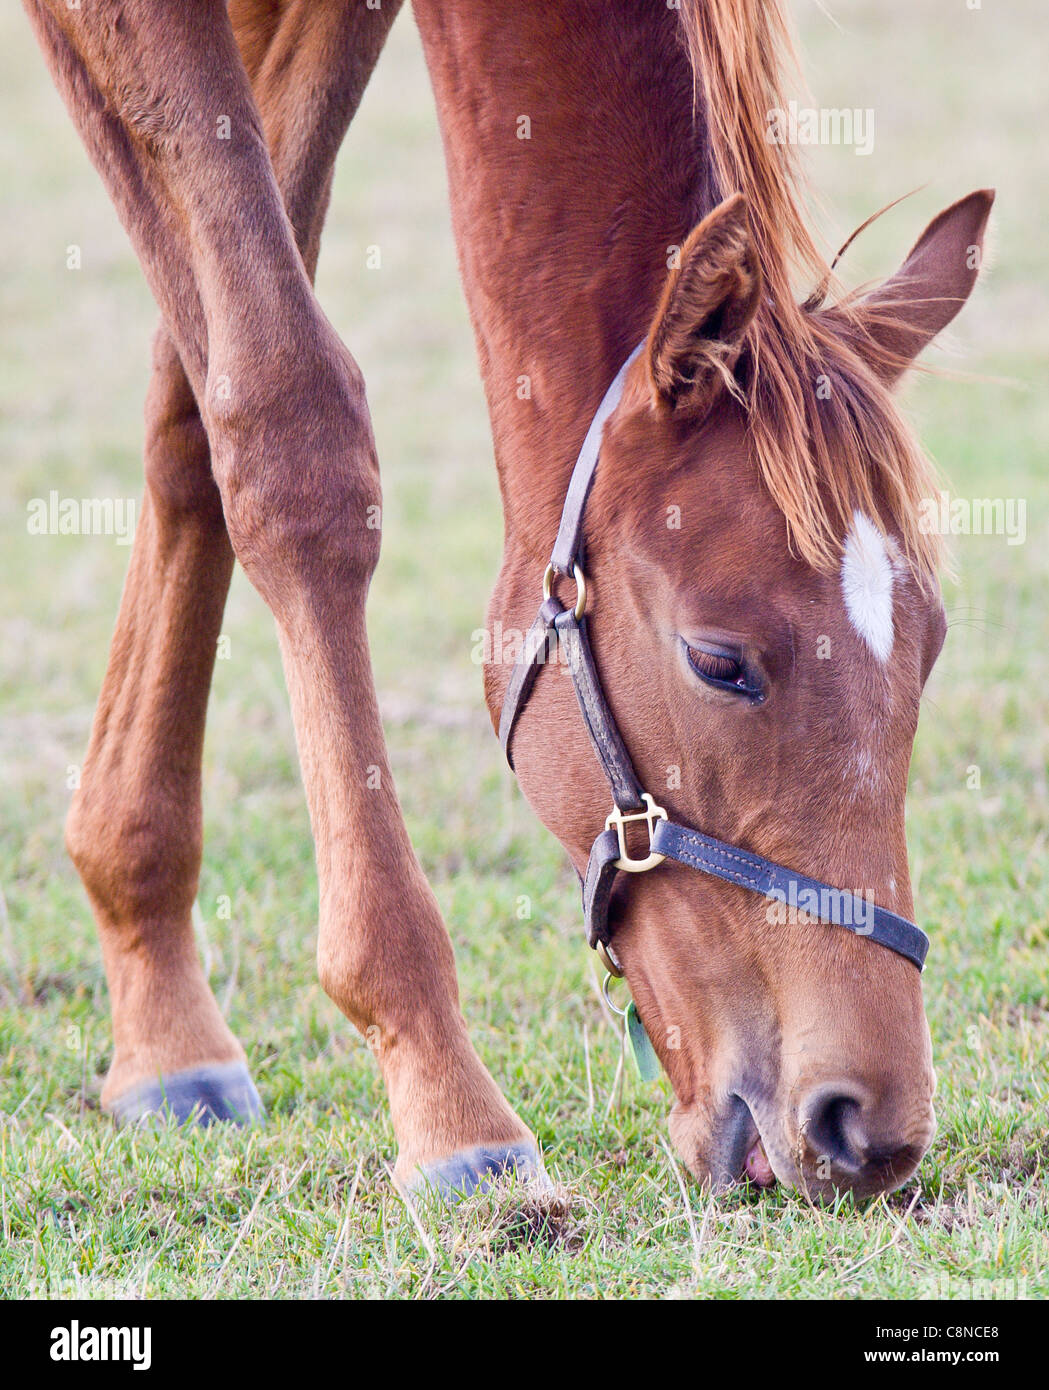 Young horse grazing Stock Photo